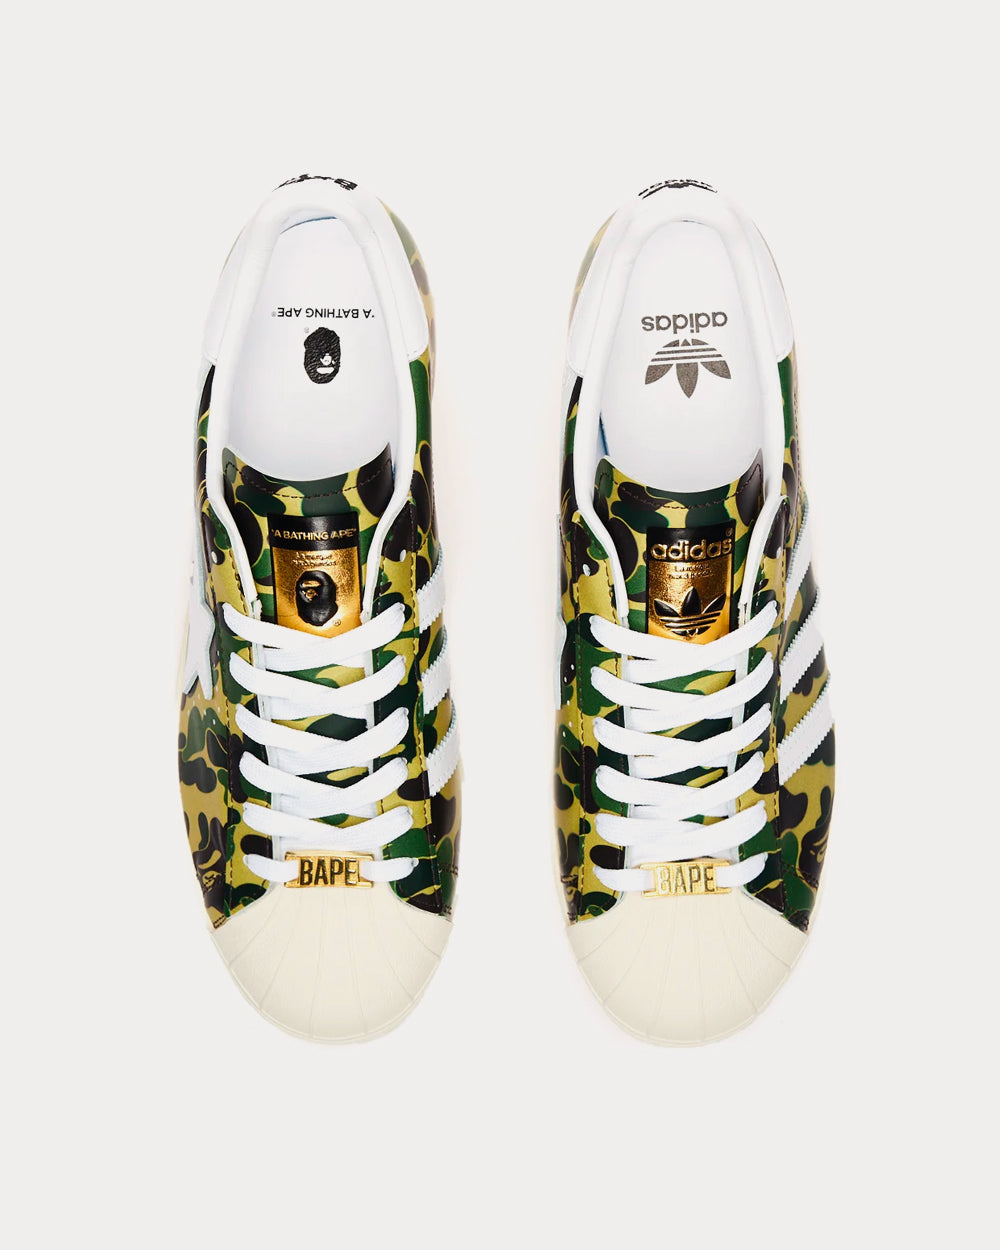 Adidas x BAPE - Superstar 80s Off White / Ftwwht / Goldmt Low Top Sneakers